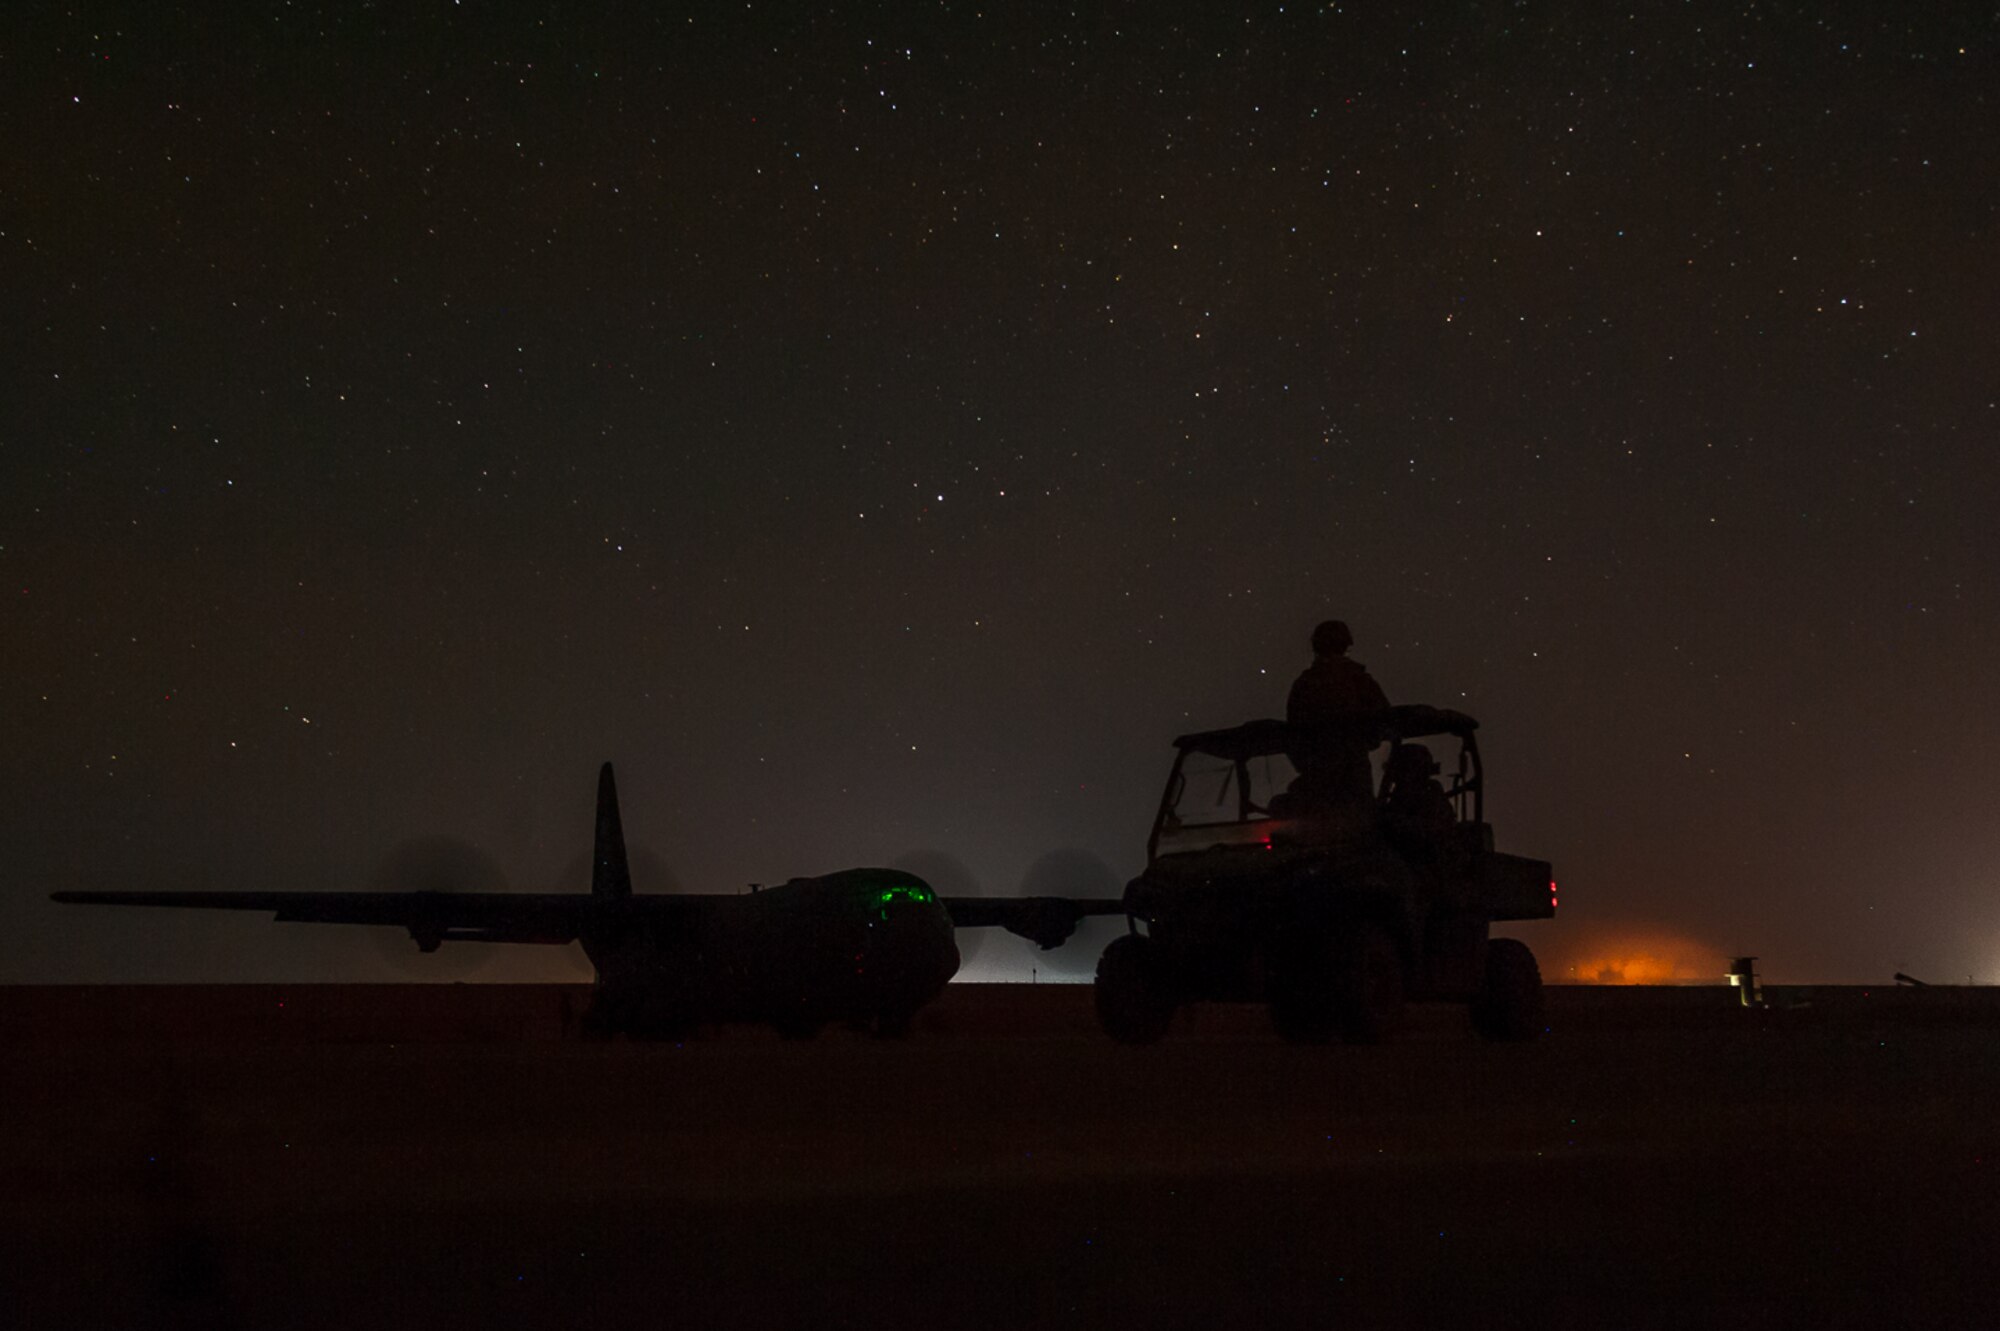 Airmen assigned to the 821st Contingency Response Group patrol the airfield at Qyarrayah West airfield, Oct. 28, 2016. Q-West, is an airfield in northern Iraq’s Ninawa Province and will serve as a logistical hub and strategic launching pad for resupplying the frontlines in the offensive to recapture Mosul from Da’esh fighters. (U.S. Air Force photo by Staff Sgt. Adam Kern)